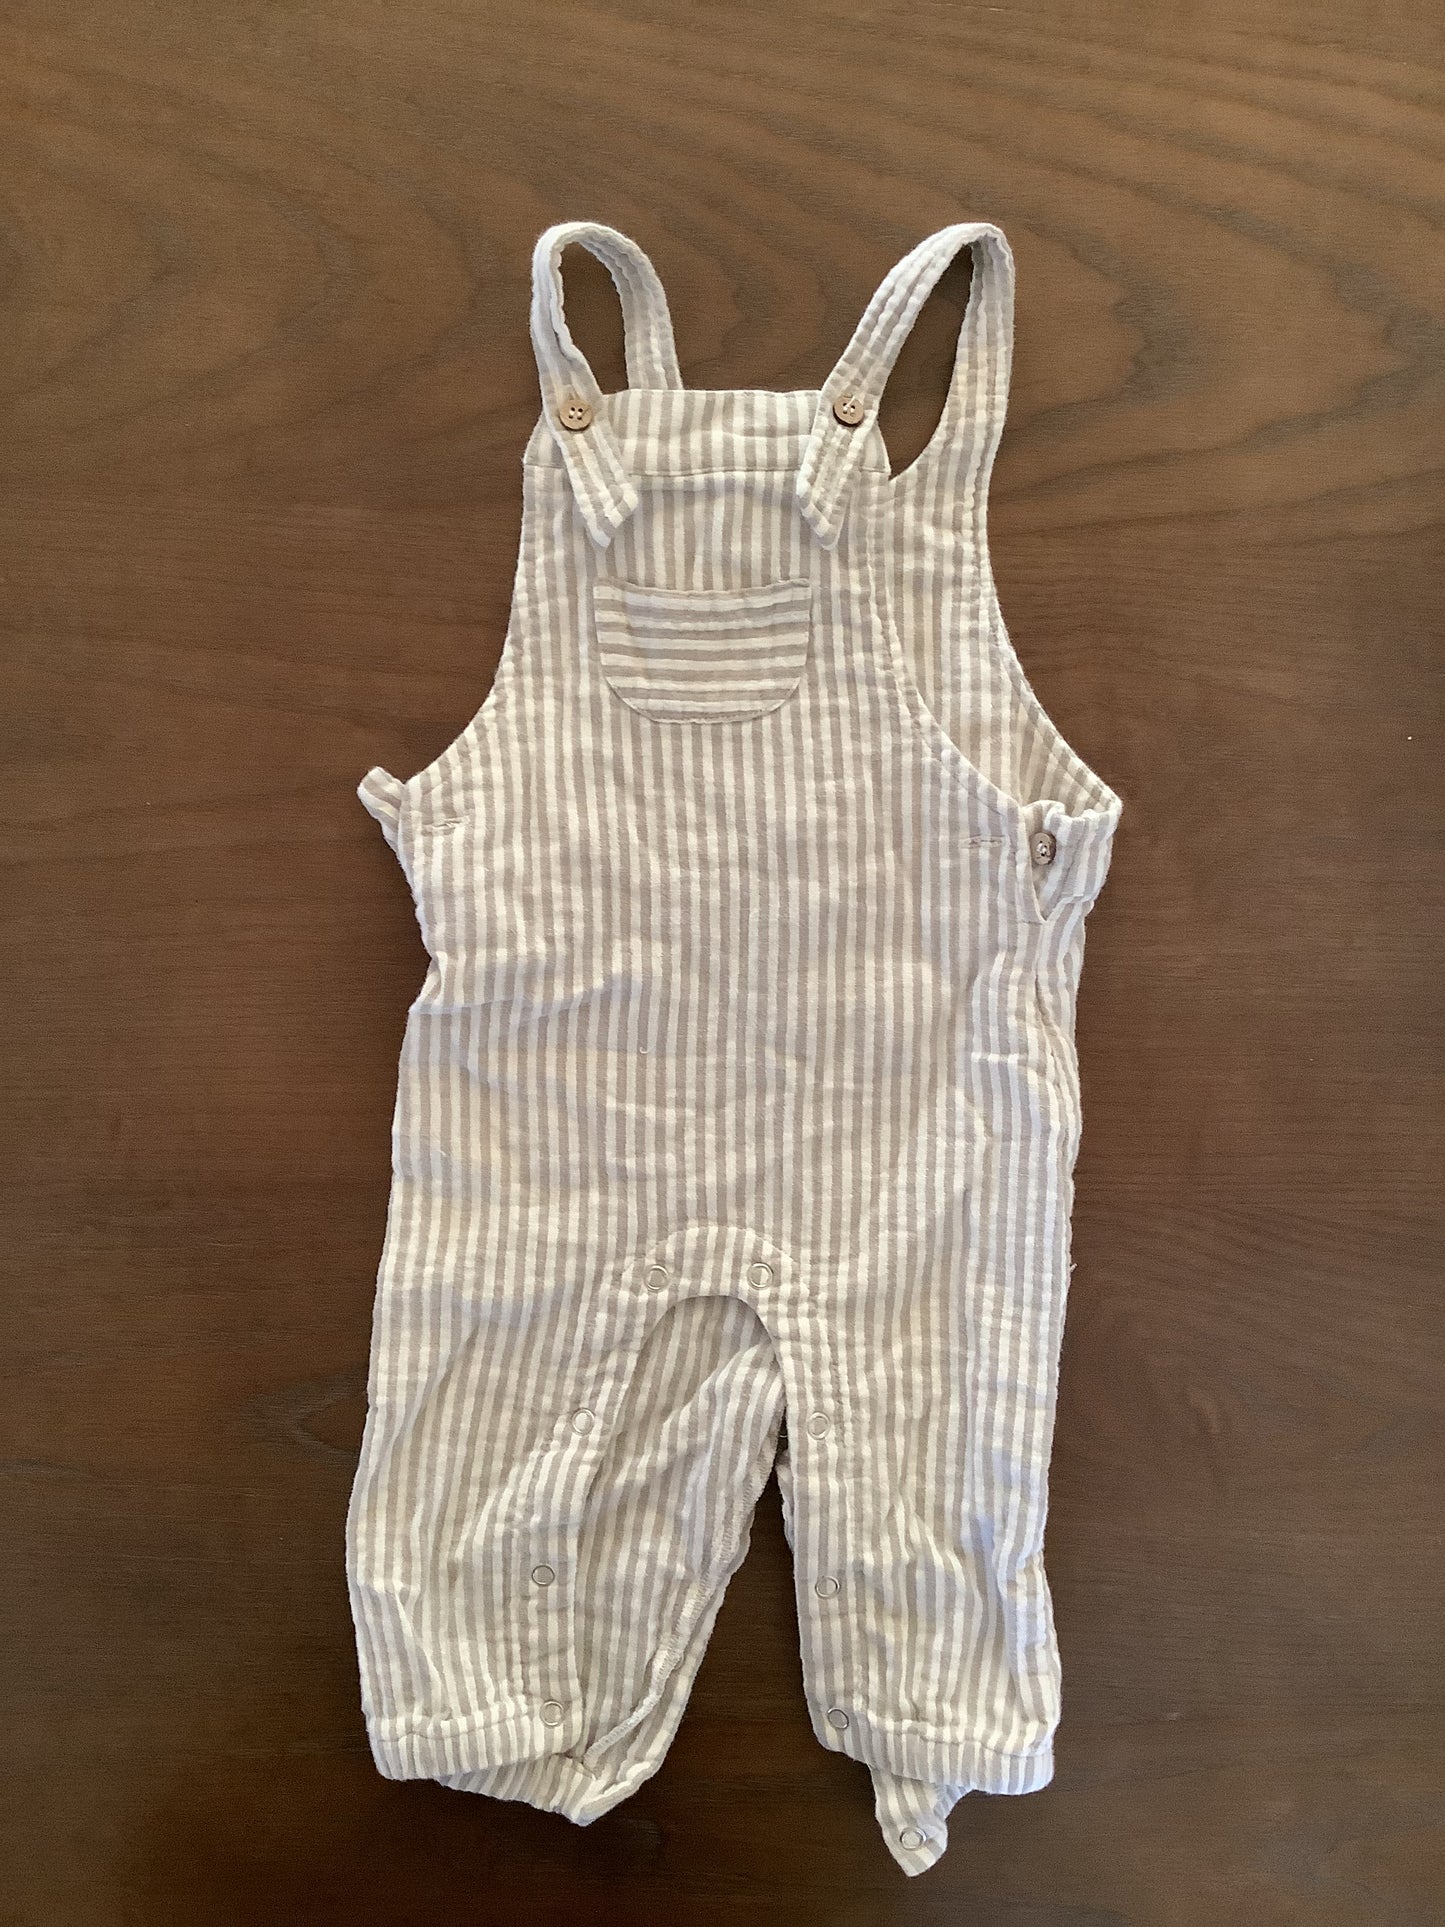 Rylee + Cru Linen White and Tan Overalls Size 6-12 Months Gender Neutral